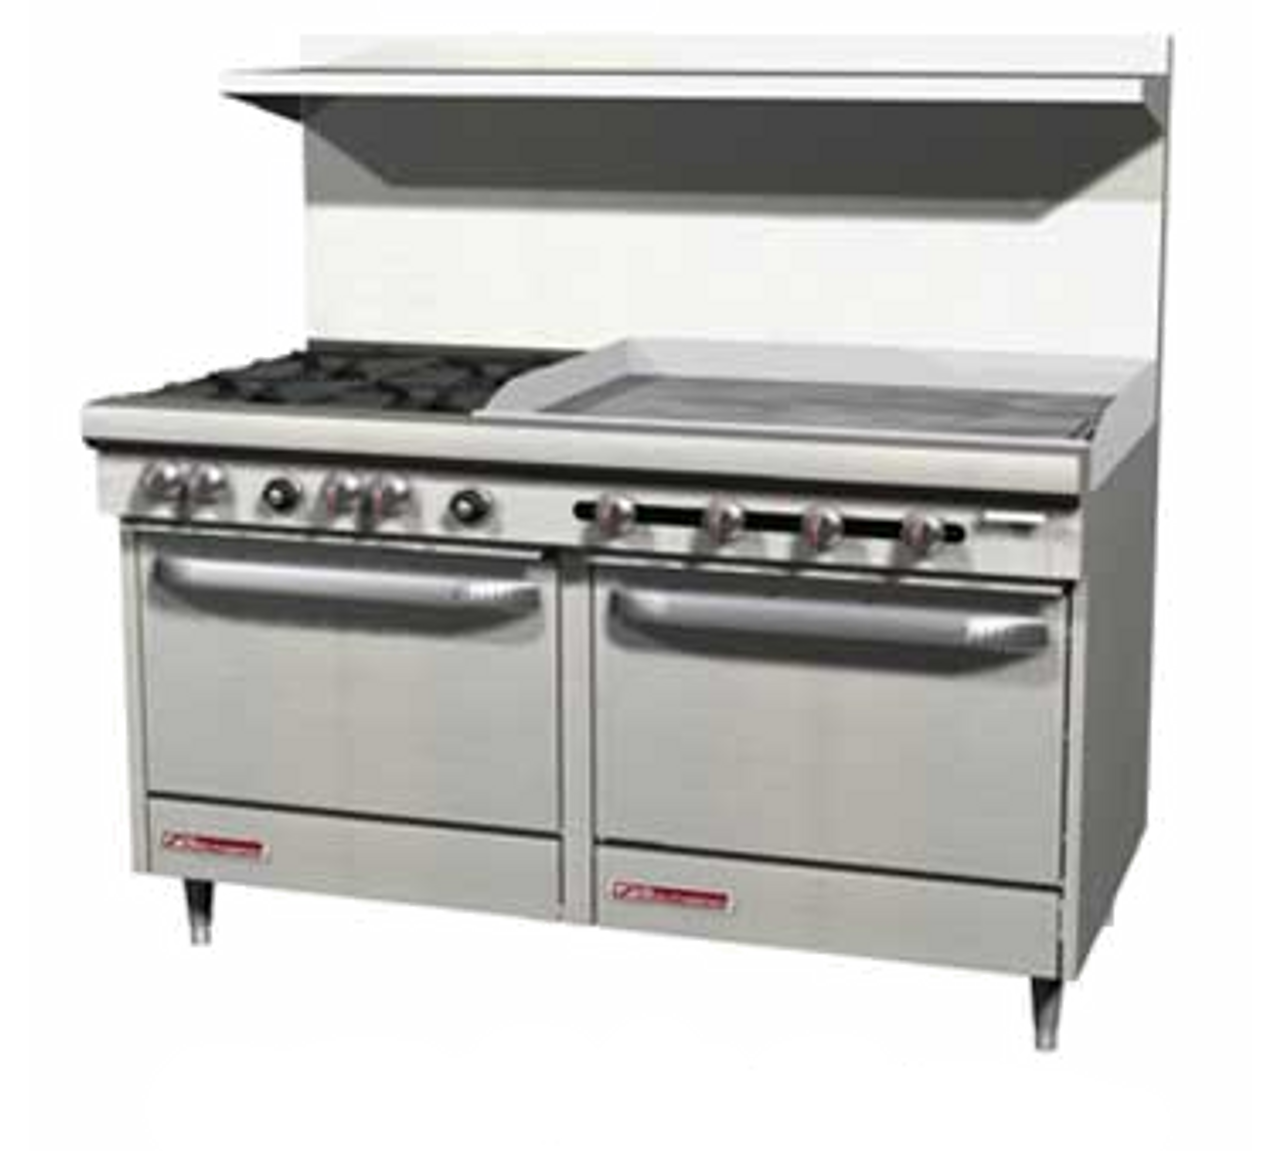 S-Series Restaurant Range, gas, 60", (6) 28,000 BTU open burners, (1) 24" griddle right, manual controls, (2) standard ovens, snap action thermostat, removable cast iron grates, (2) crumb drawers & shelf, hinged lower valve panel, includes (1) rack per oven, stainless steel front, sides, shelf, 4" front rail & 6" adjustable legs, 286,000 BTU, cCSAus, CSA Flame, CSA Star, NSF S60DD-3GR PICTURED.